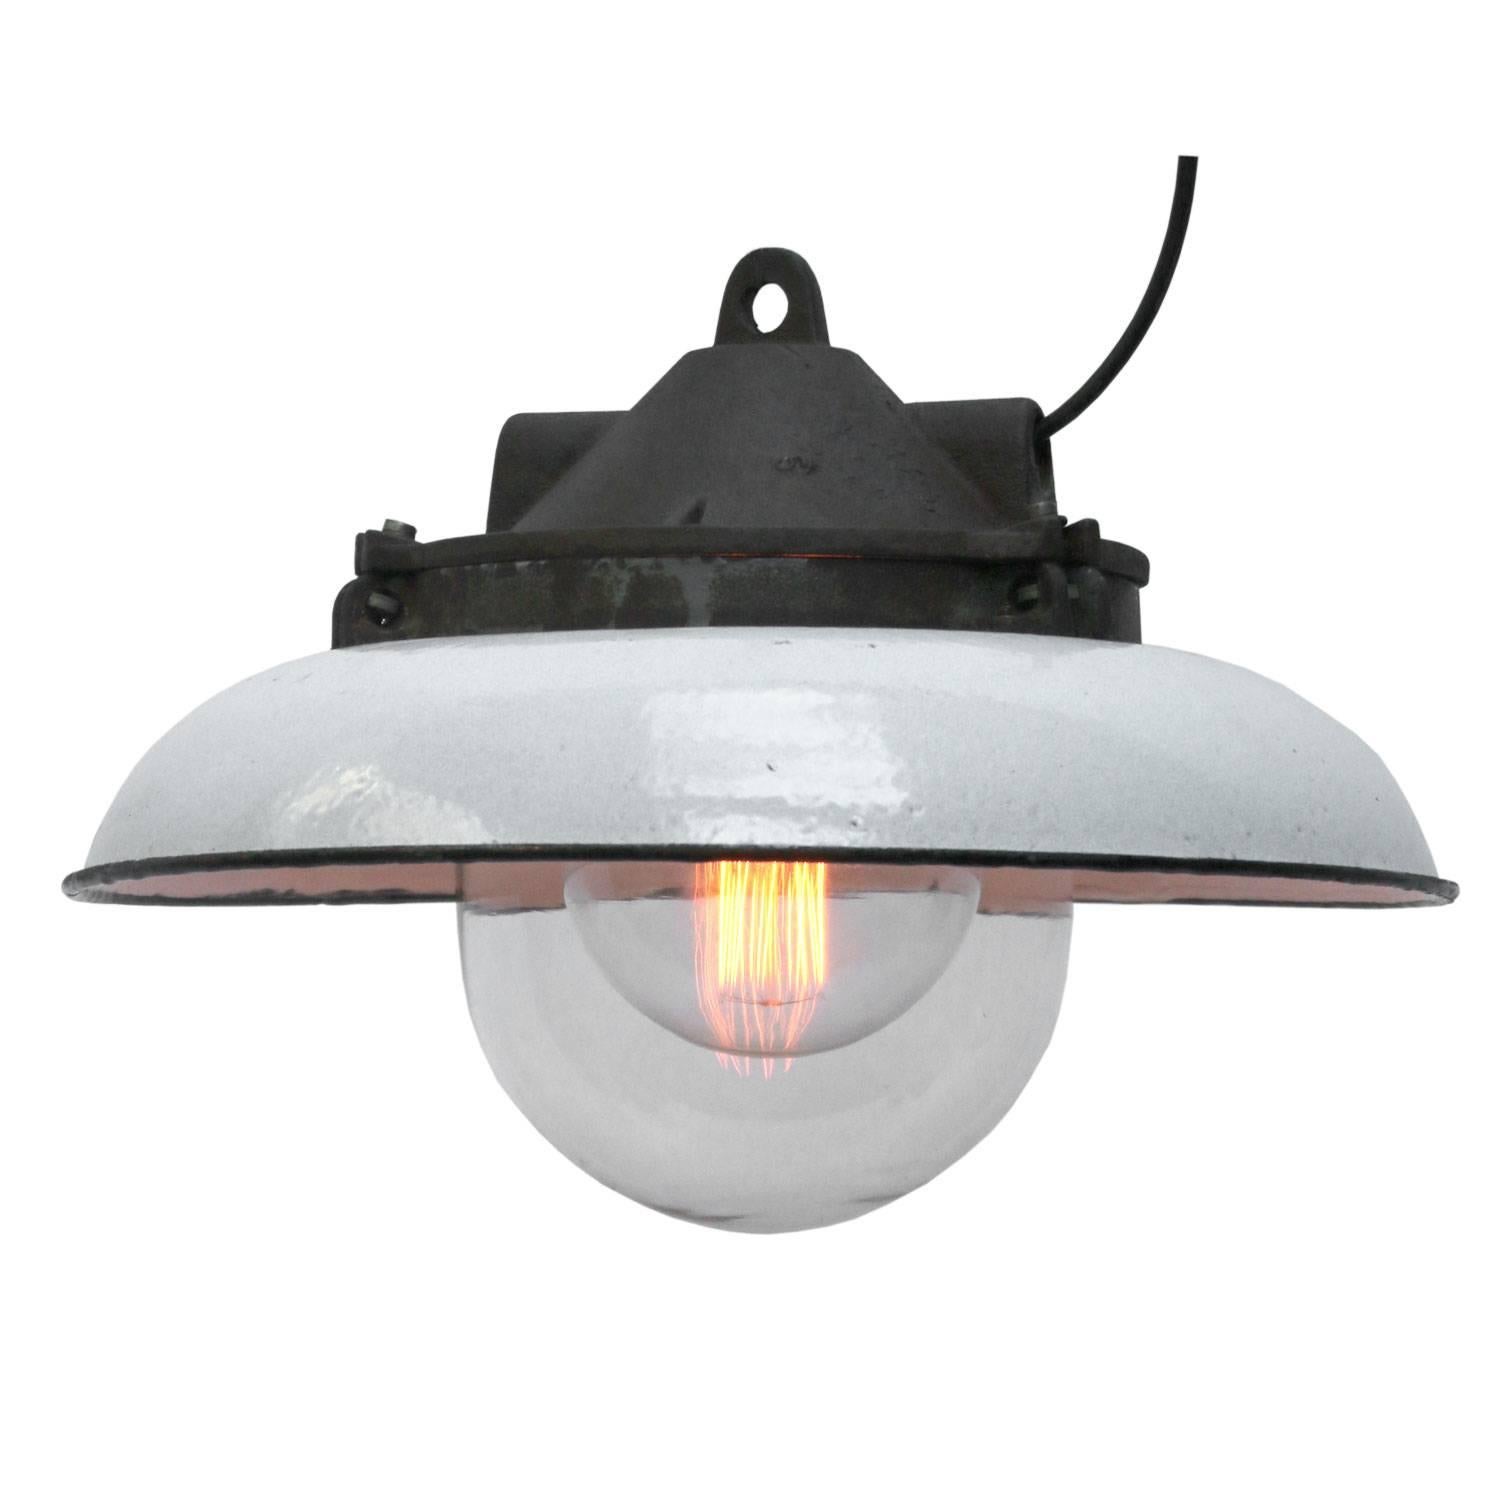 Industrial factory pendant. Gray enamel shade. Cast iron top with clear glass.

Weight: 6.0 kg / 13.2 lb

All lamps have been made suitable by international standards for incandescent light bulbs, energy-efficient and LED bulbs. E26/E27 bulb holders